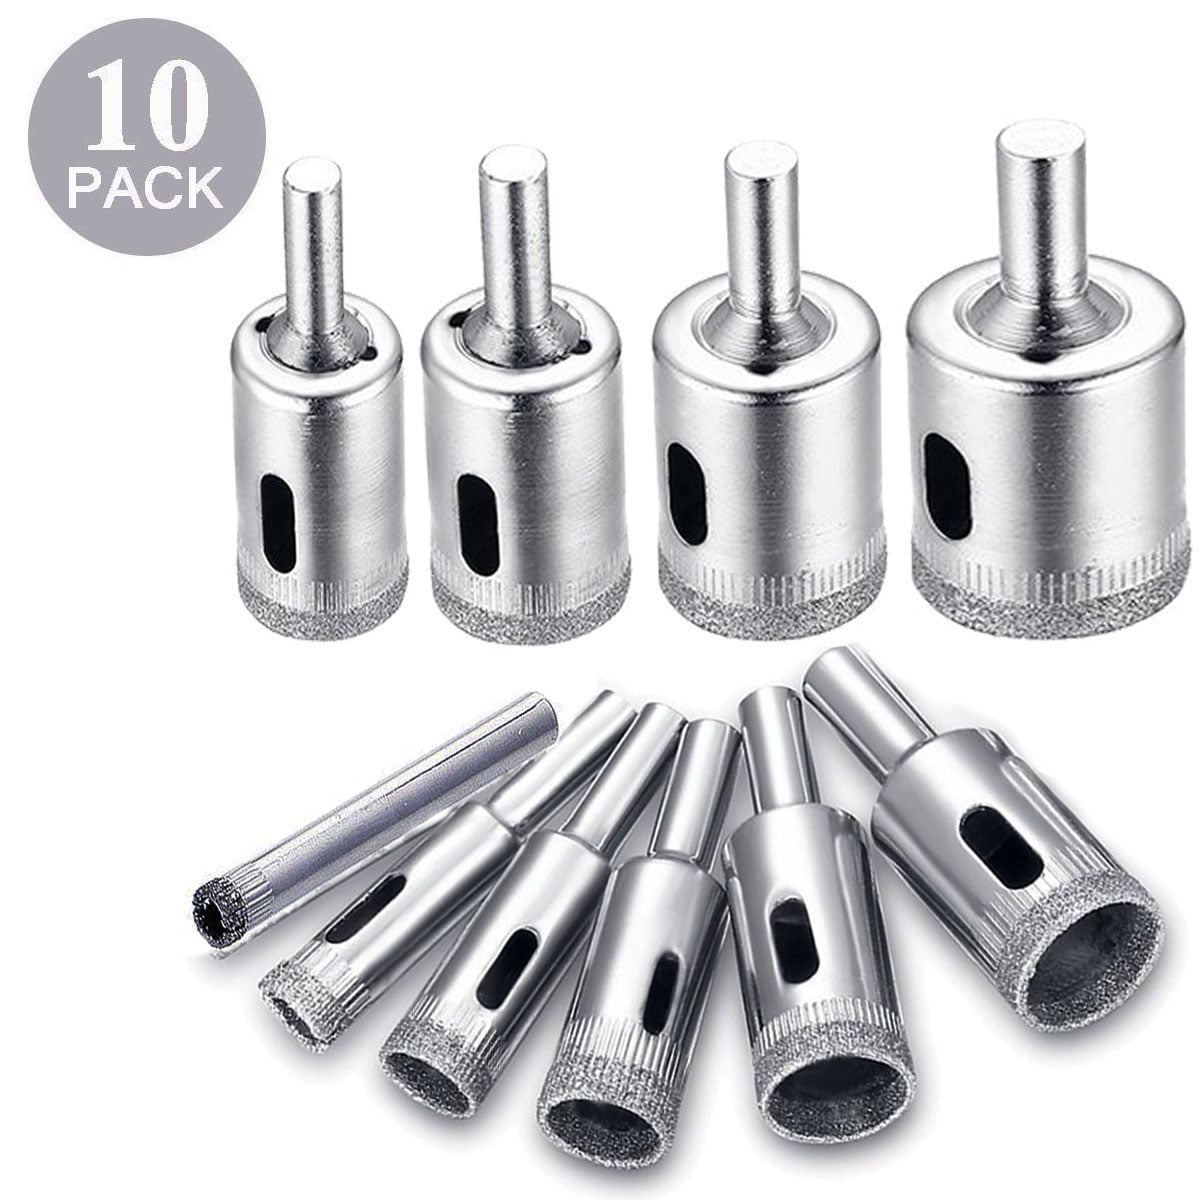 5Pcs Diamond Hole Saw Drill Core Bits Cutter Tool For Marble Tile Stone 6mm~14mm 